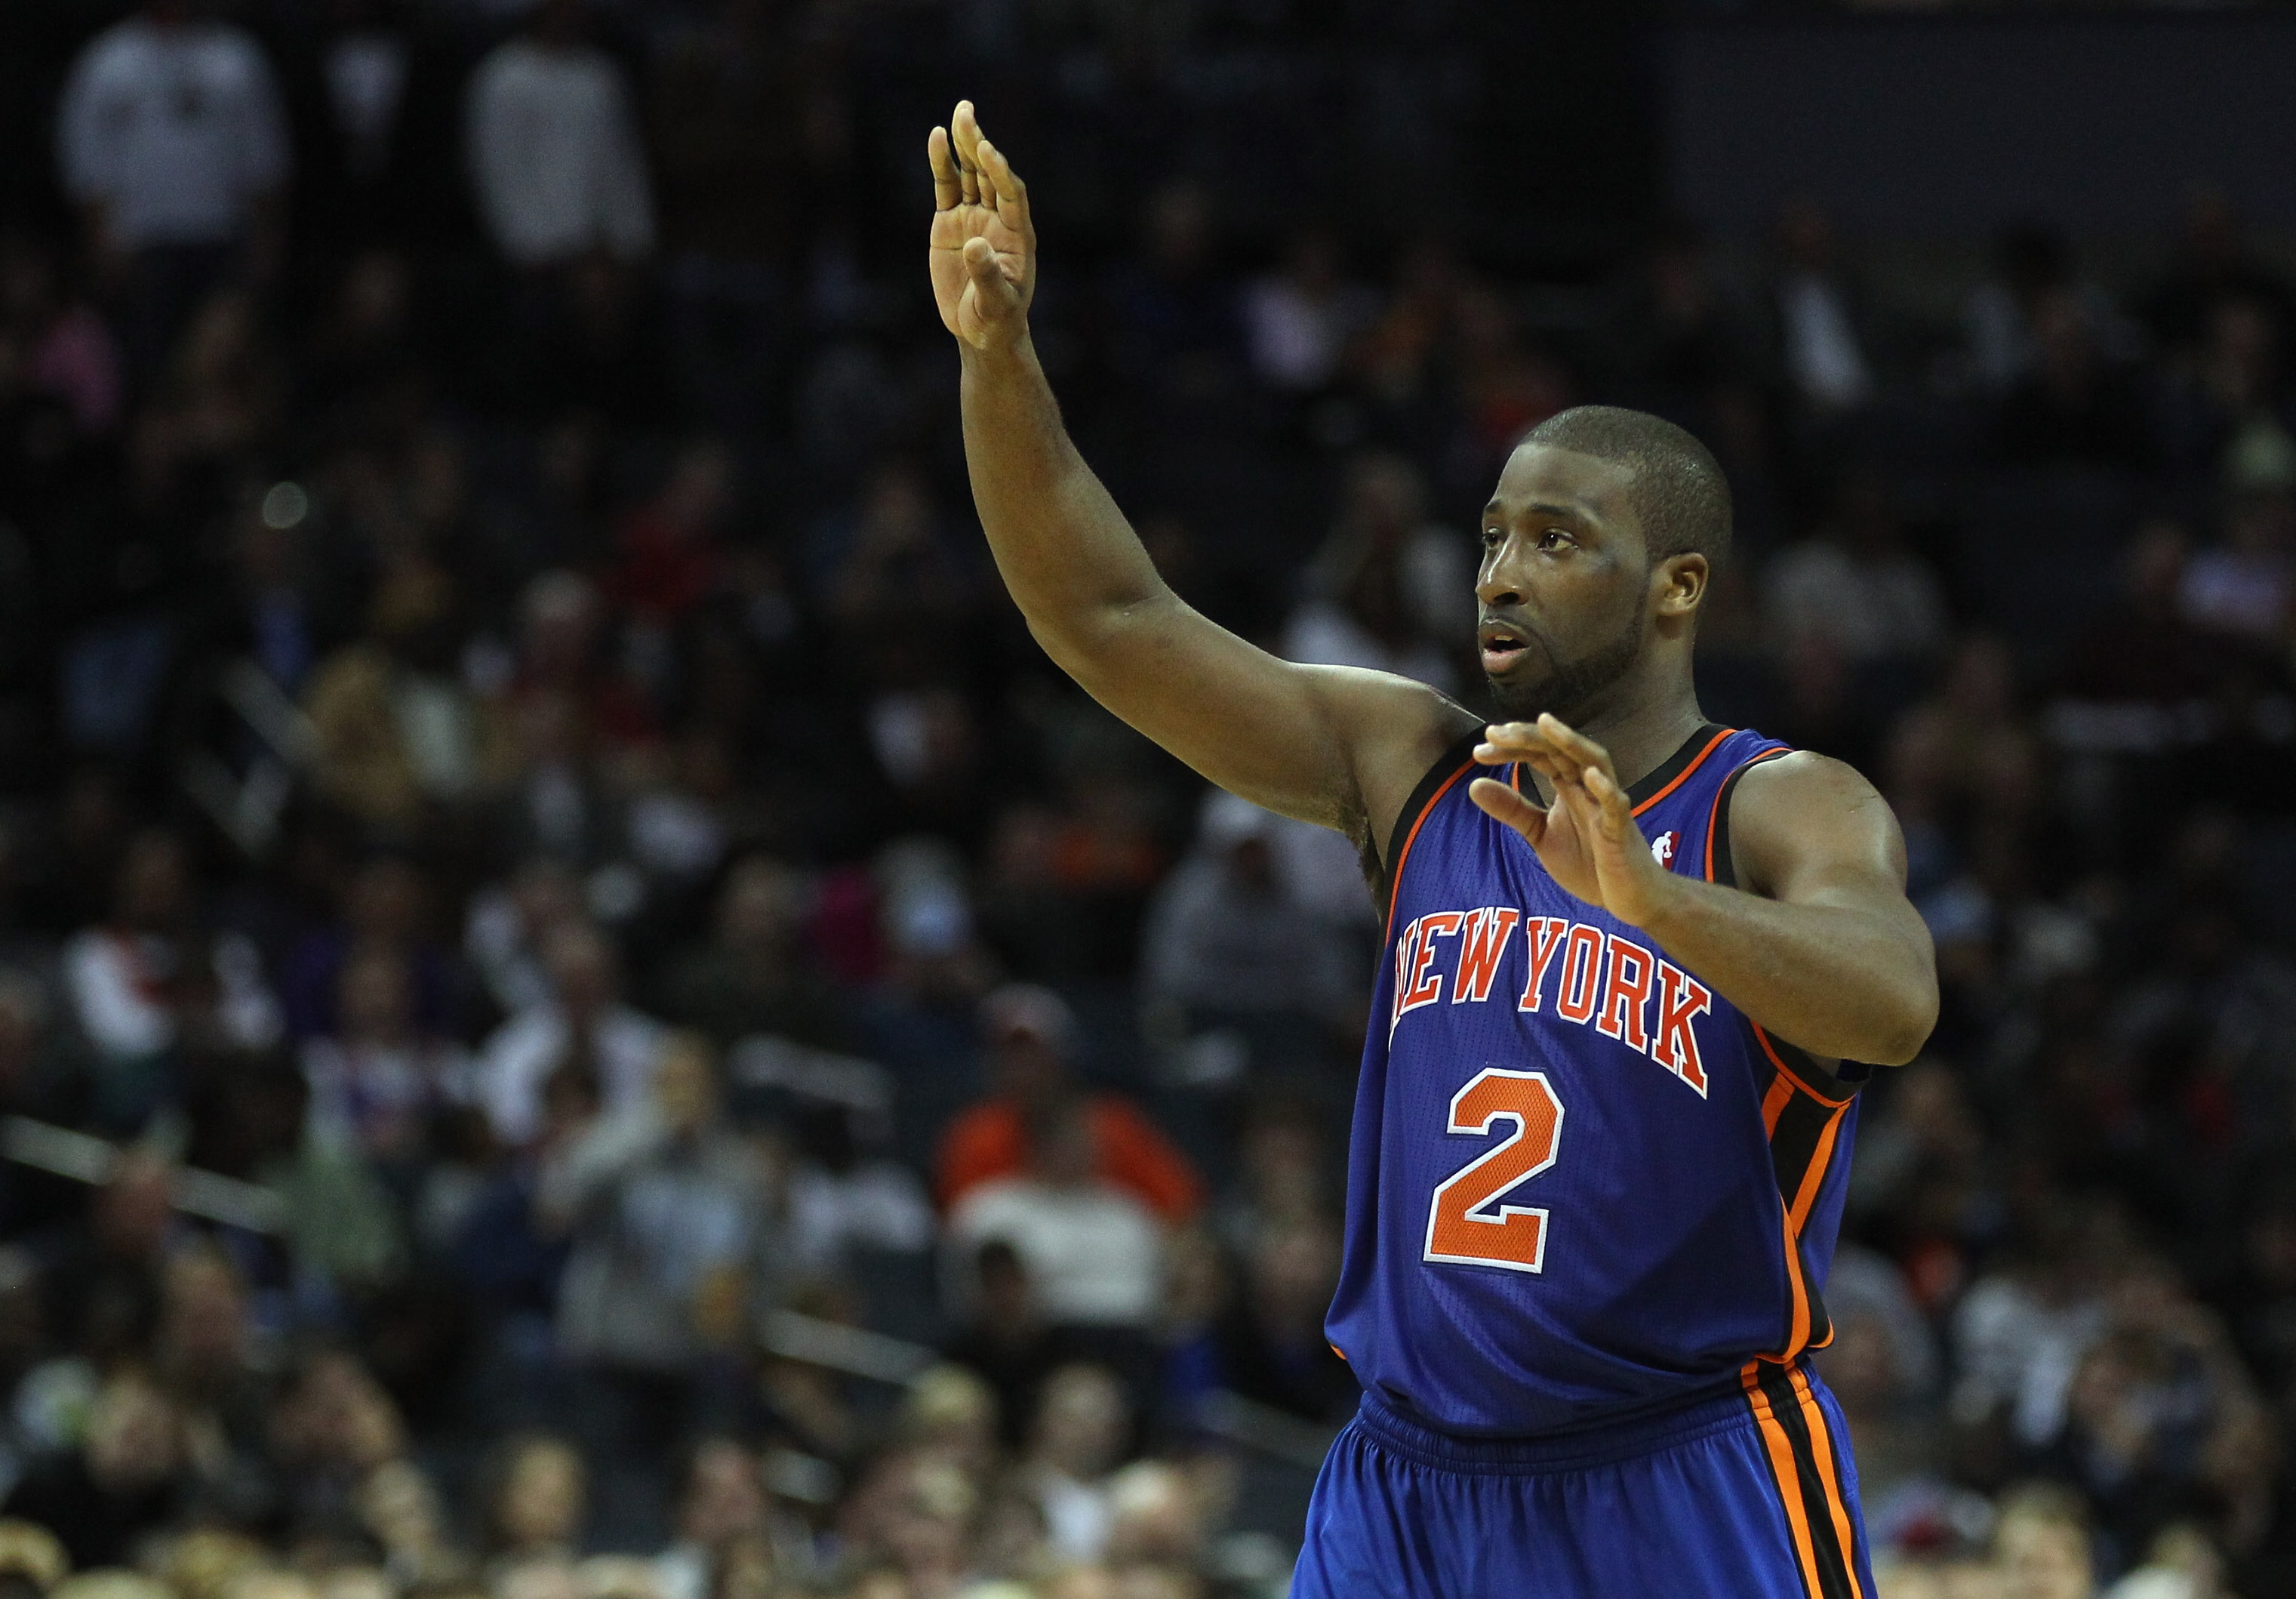 CHARLOTTE, NC - NOVEMBER 24:  Raymond Felton #2 of the New York Knicks against the Charlotte Bobcats at Time Warner Cable Arena on November 24, 2010 in Charlotte, North Carolina.  NOTE TO USER: User expressly acknowledges and agrees that, by downloading a